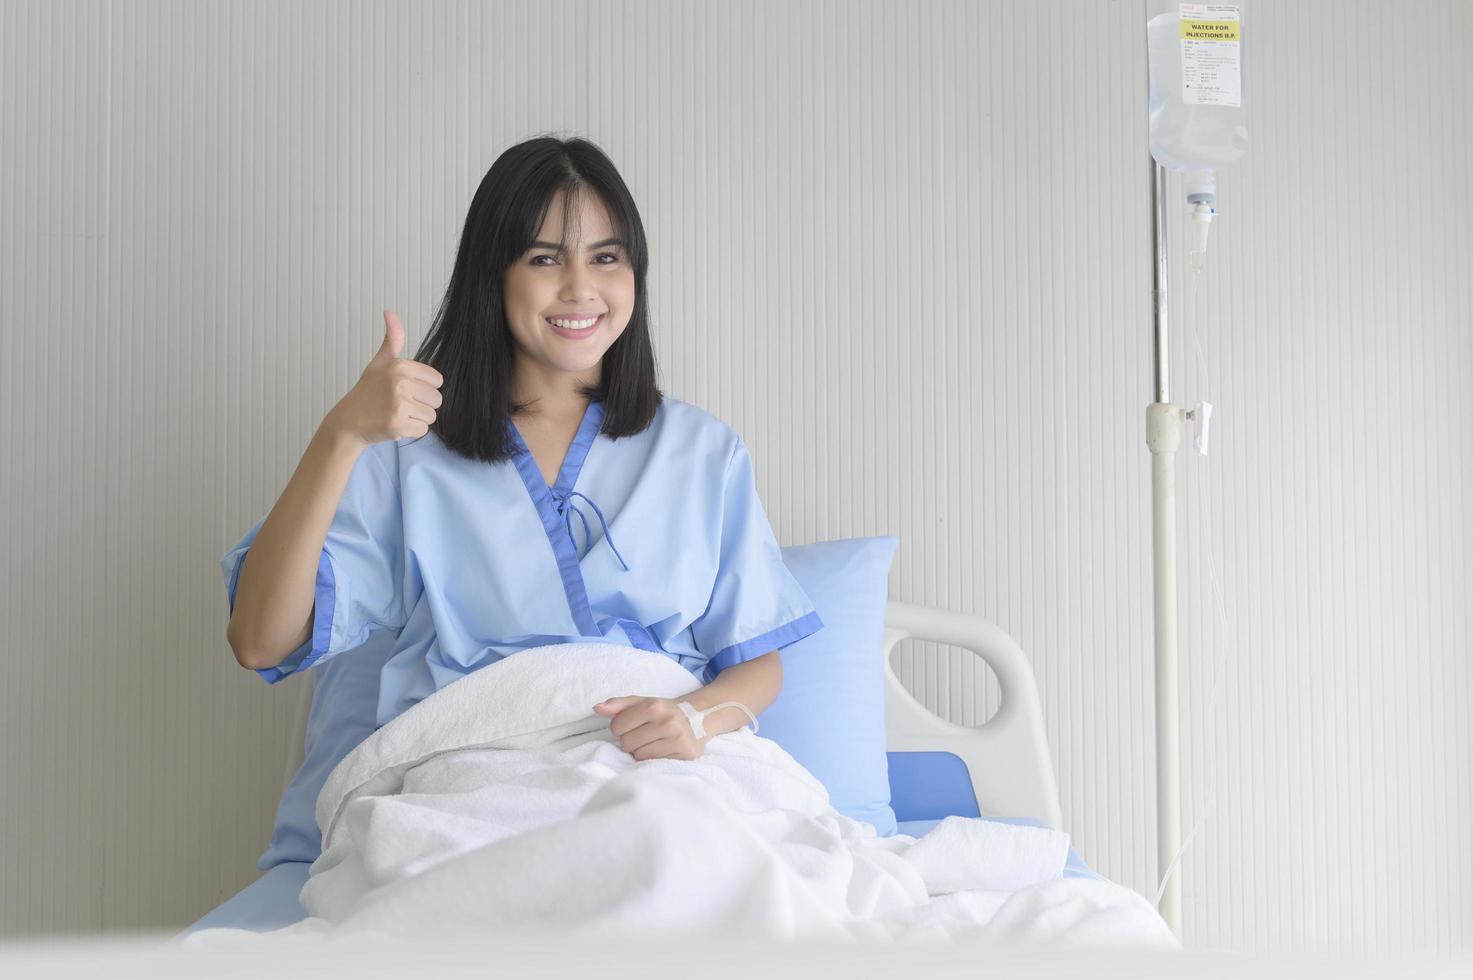 Hopeful and happy young patient woman in hospital, healthcare and medical concept photo